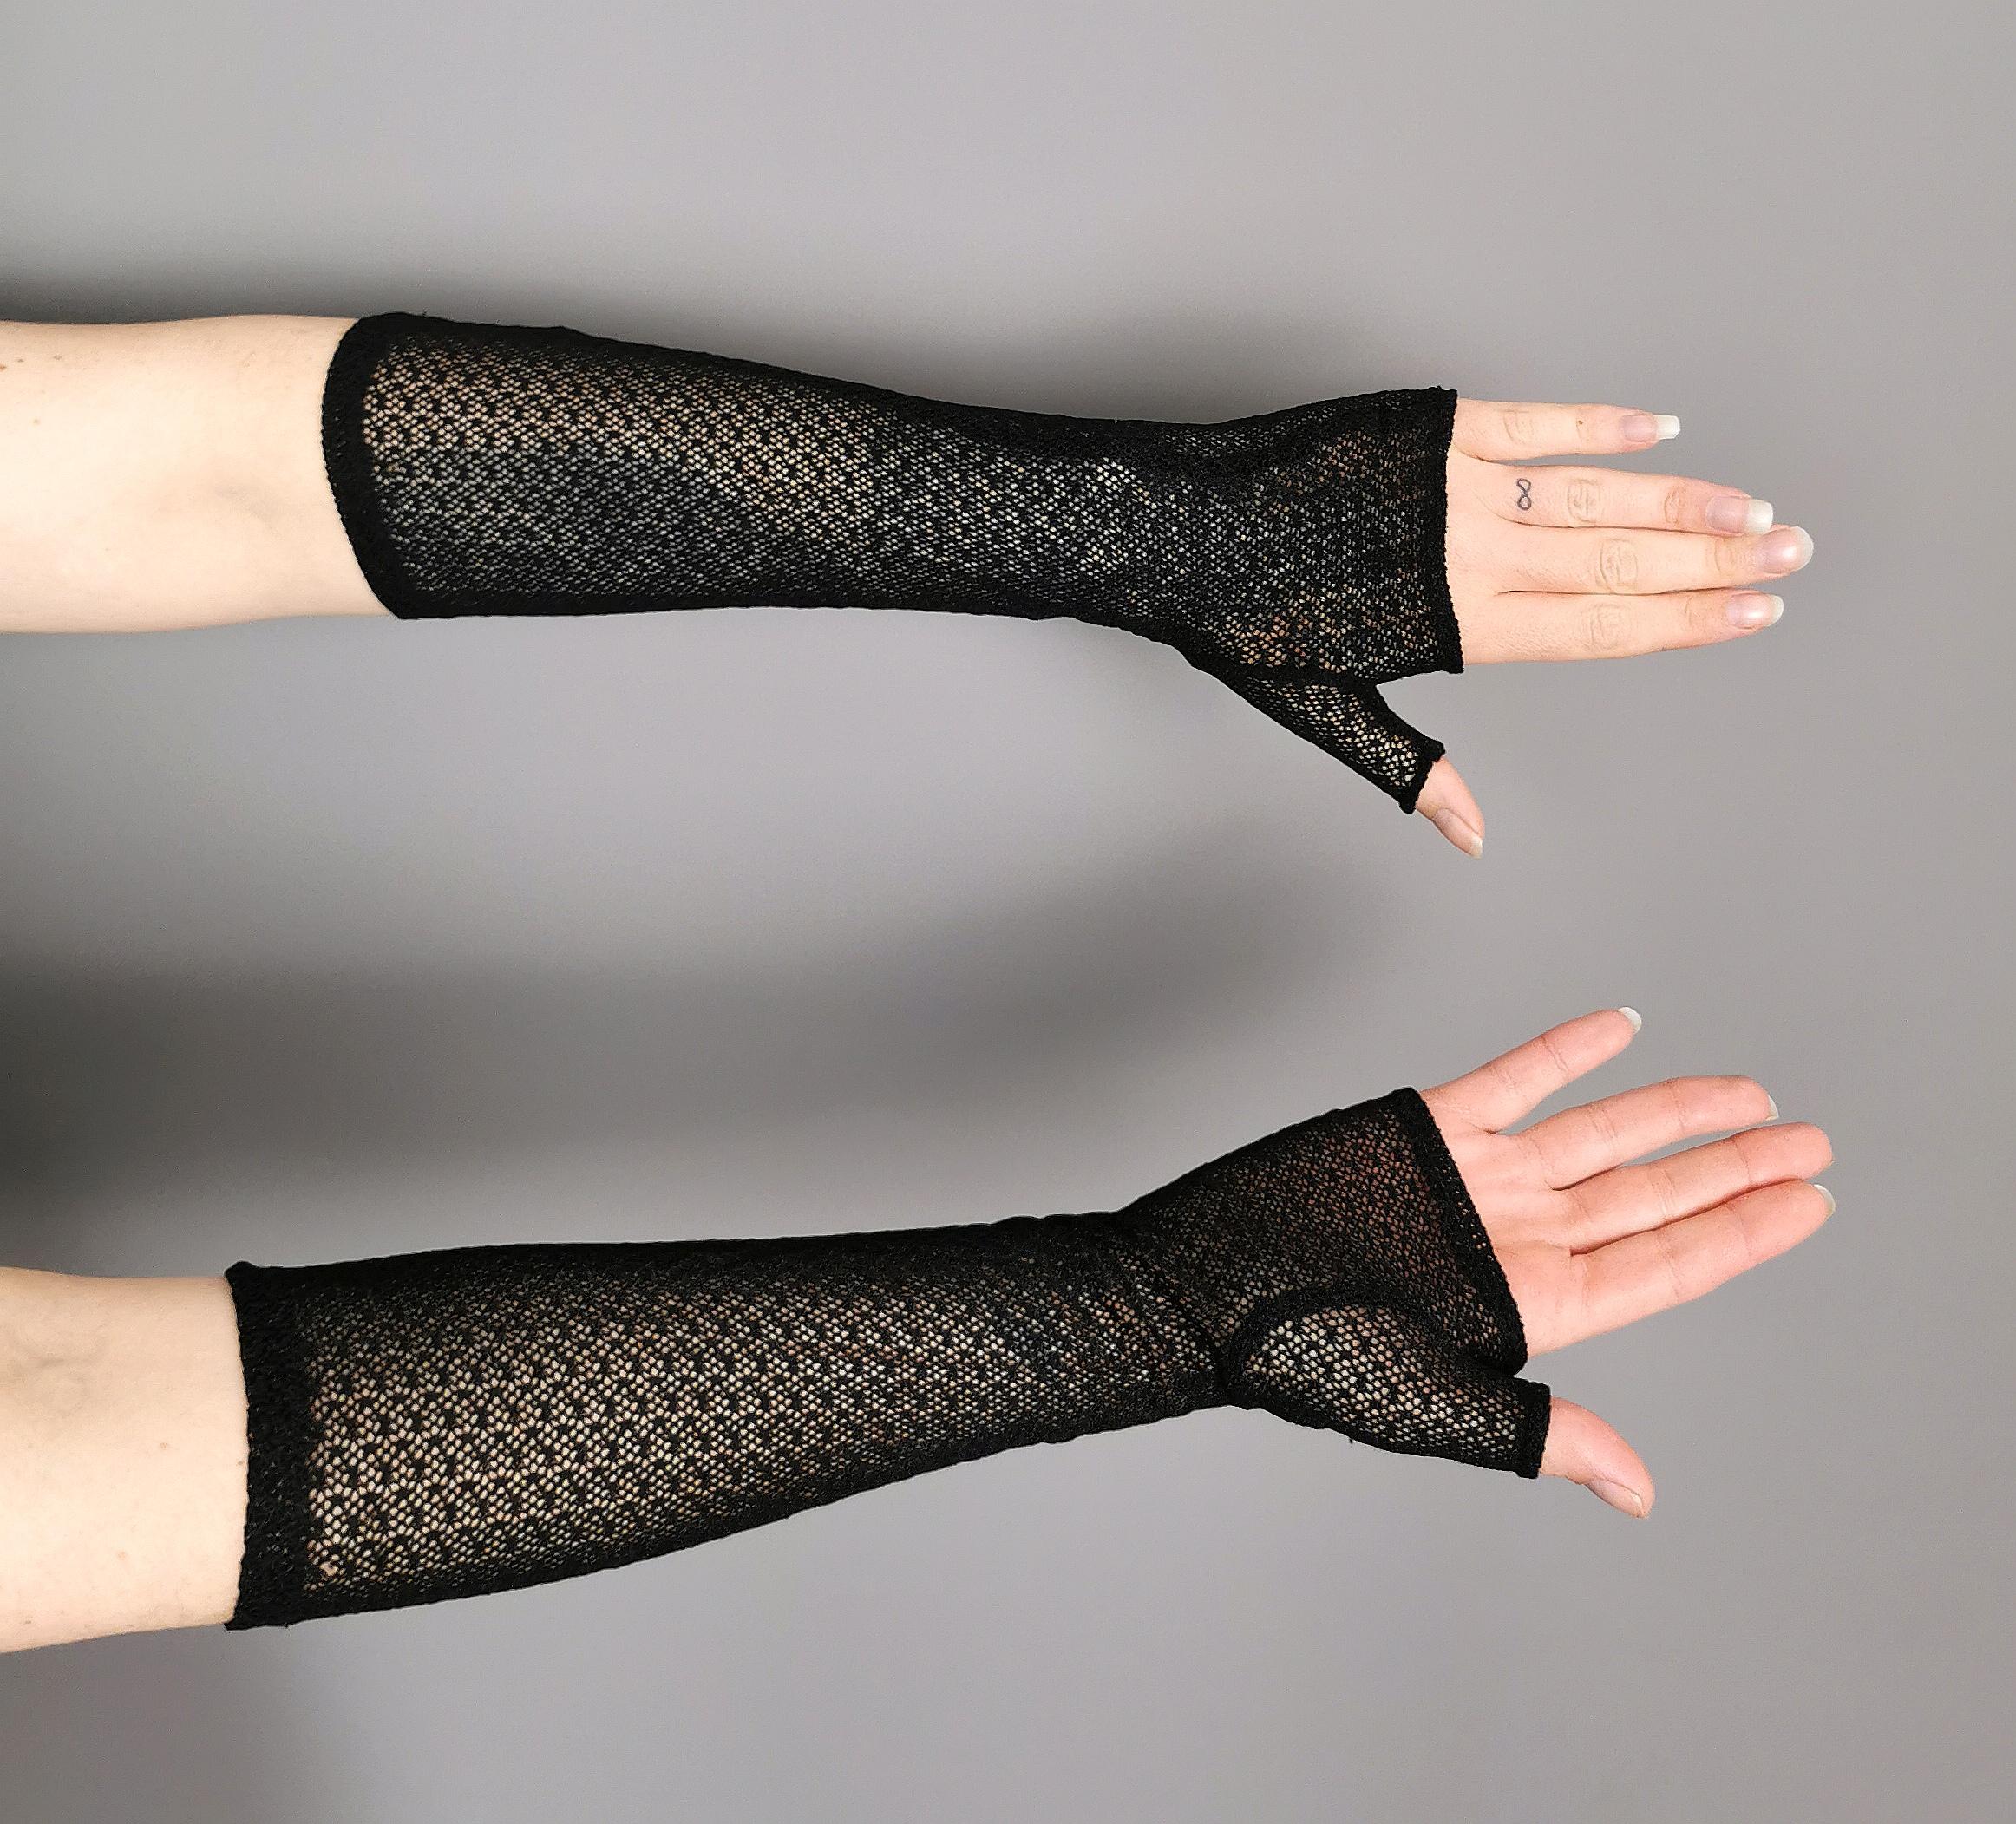 A rare pair of late Victorian fingerless gloves or mittens.

In a black nettting or fishnet type silk blend fabric.

This style has been copied for centuries and remains a very popular and wearable style today, working well with so many fashion